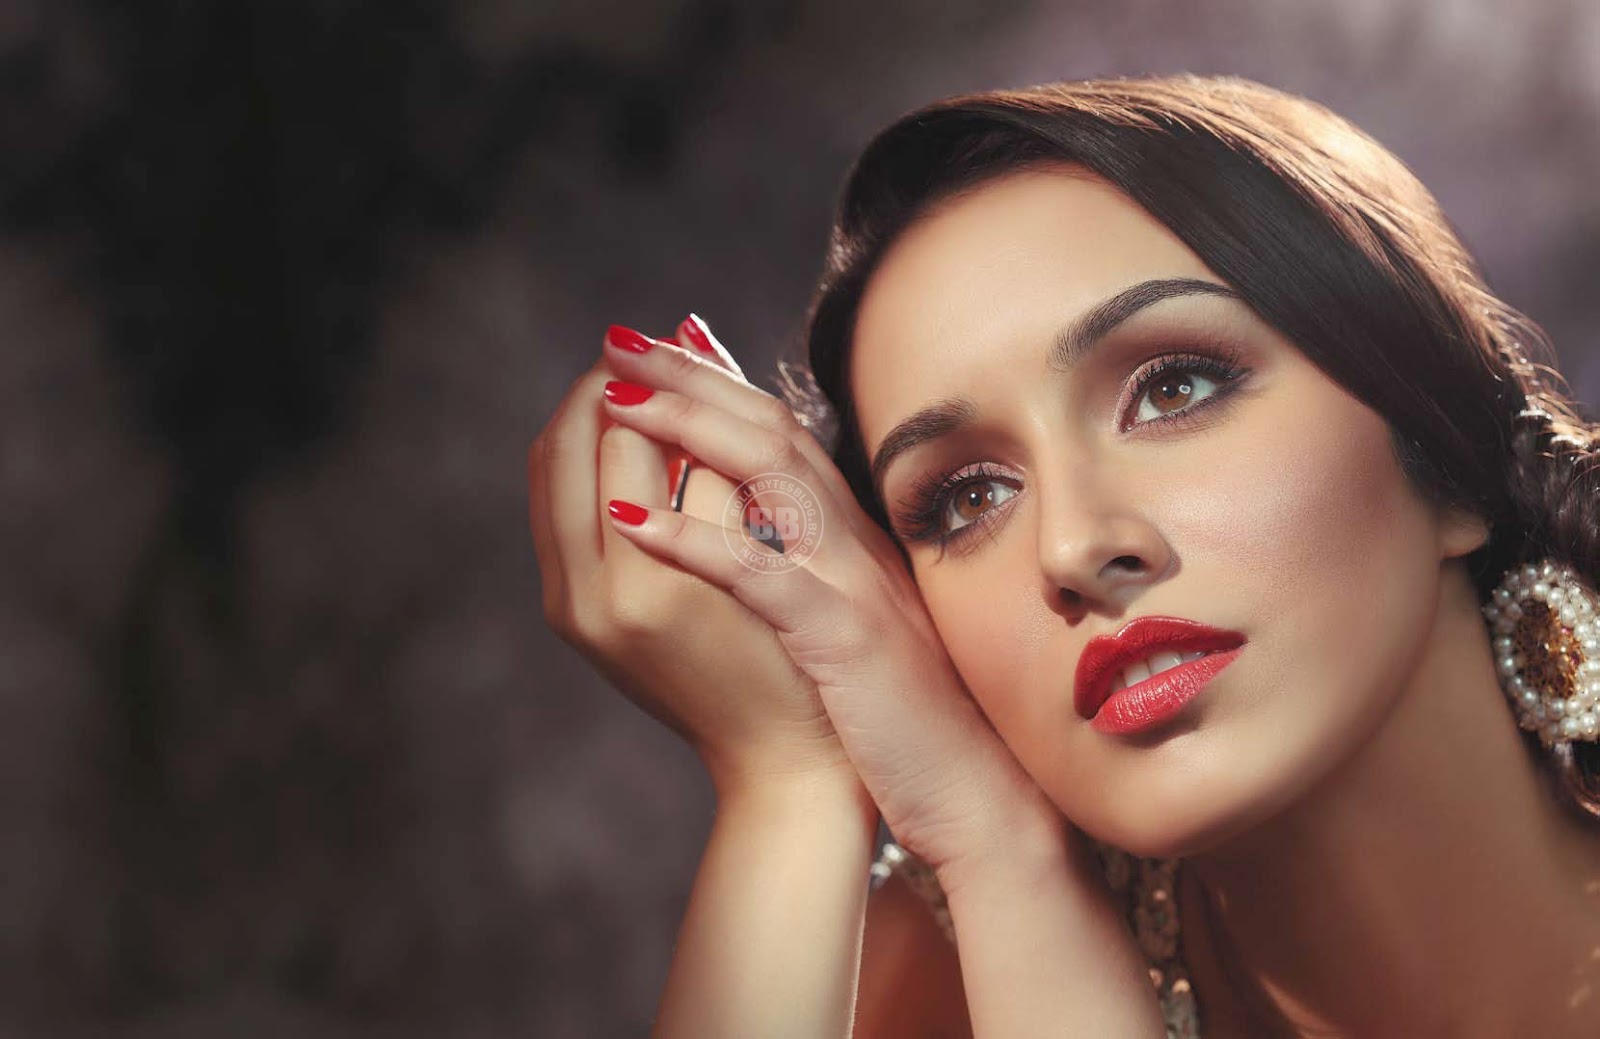 Hot-Sensuous-Shraddha-Kapoor-Real-HD-Photoshoot-for-Marie-Claire-Beauty-India-Magazine-June-2012-Image-06.jpg